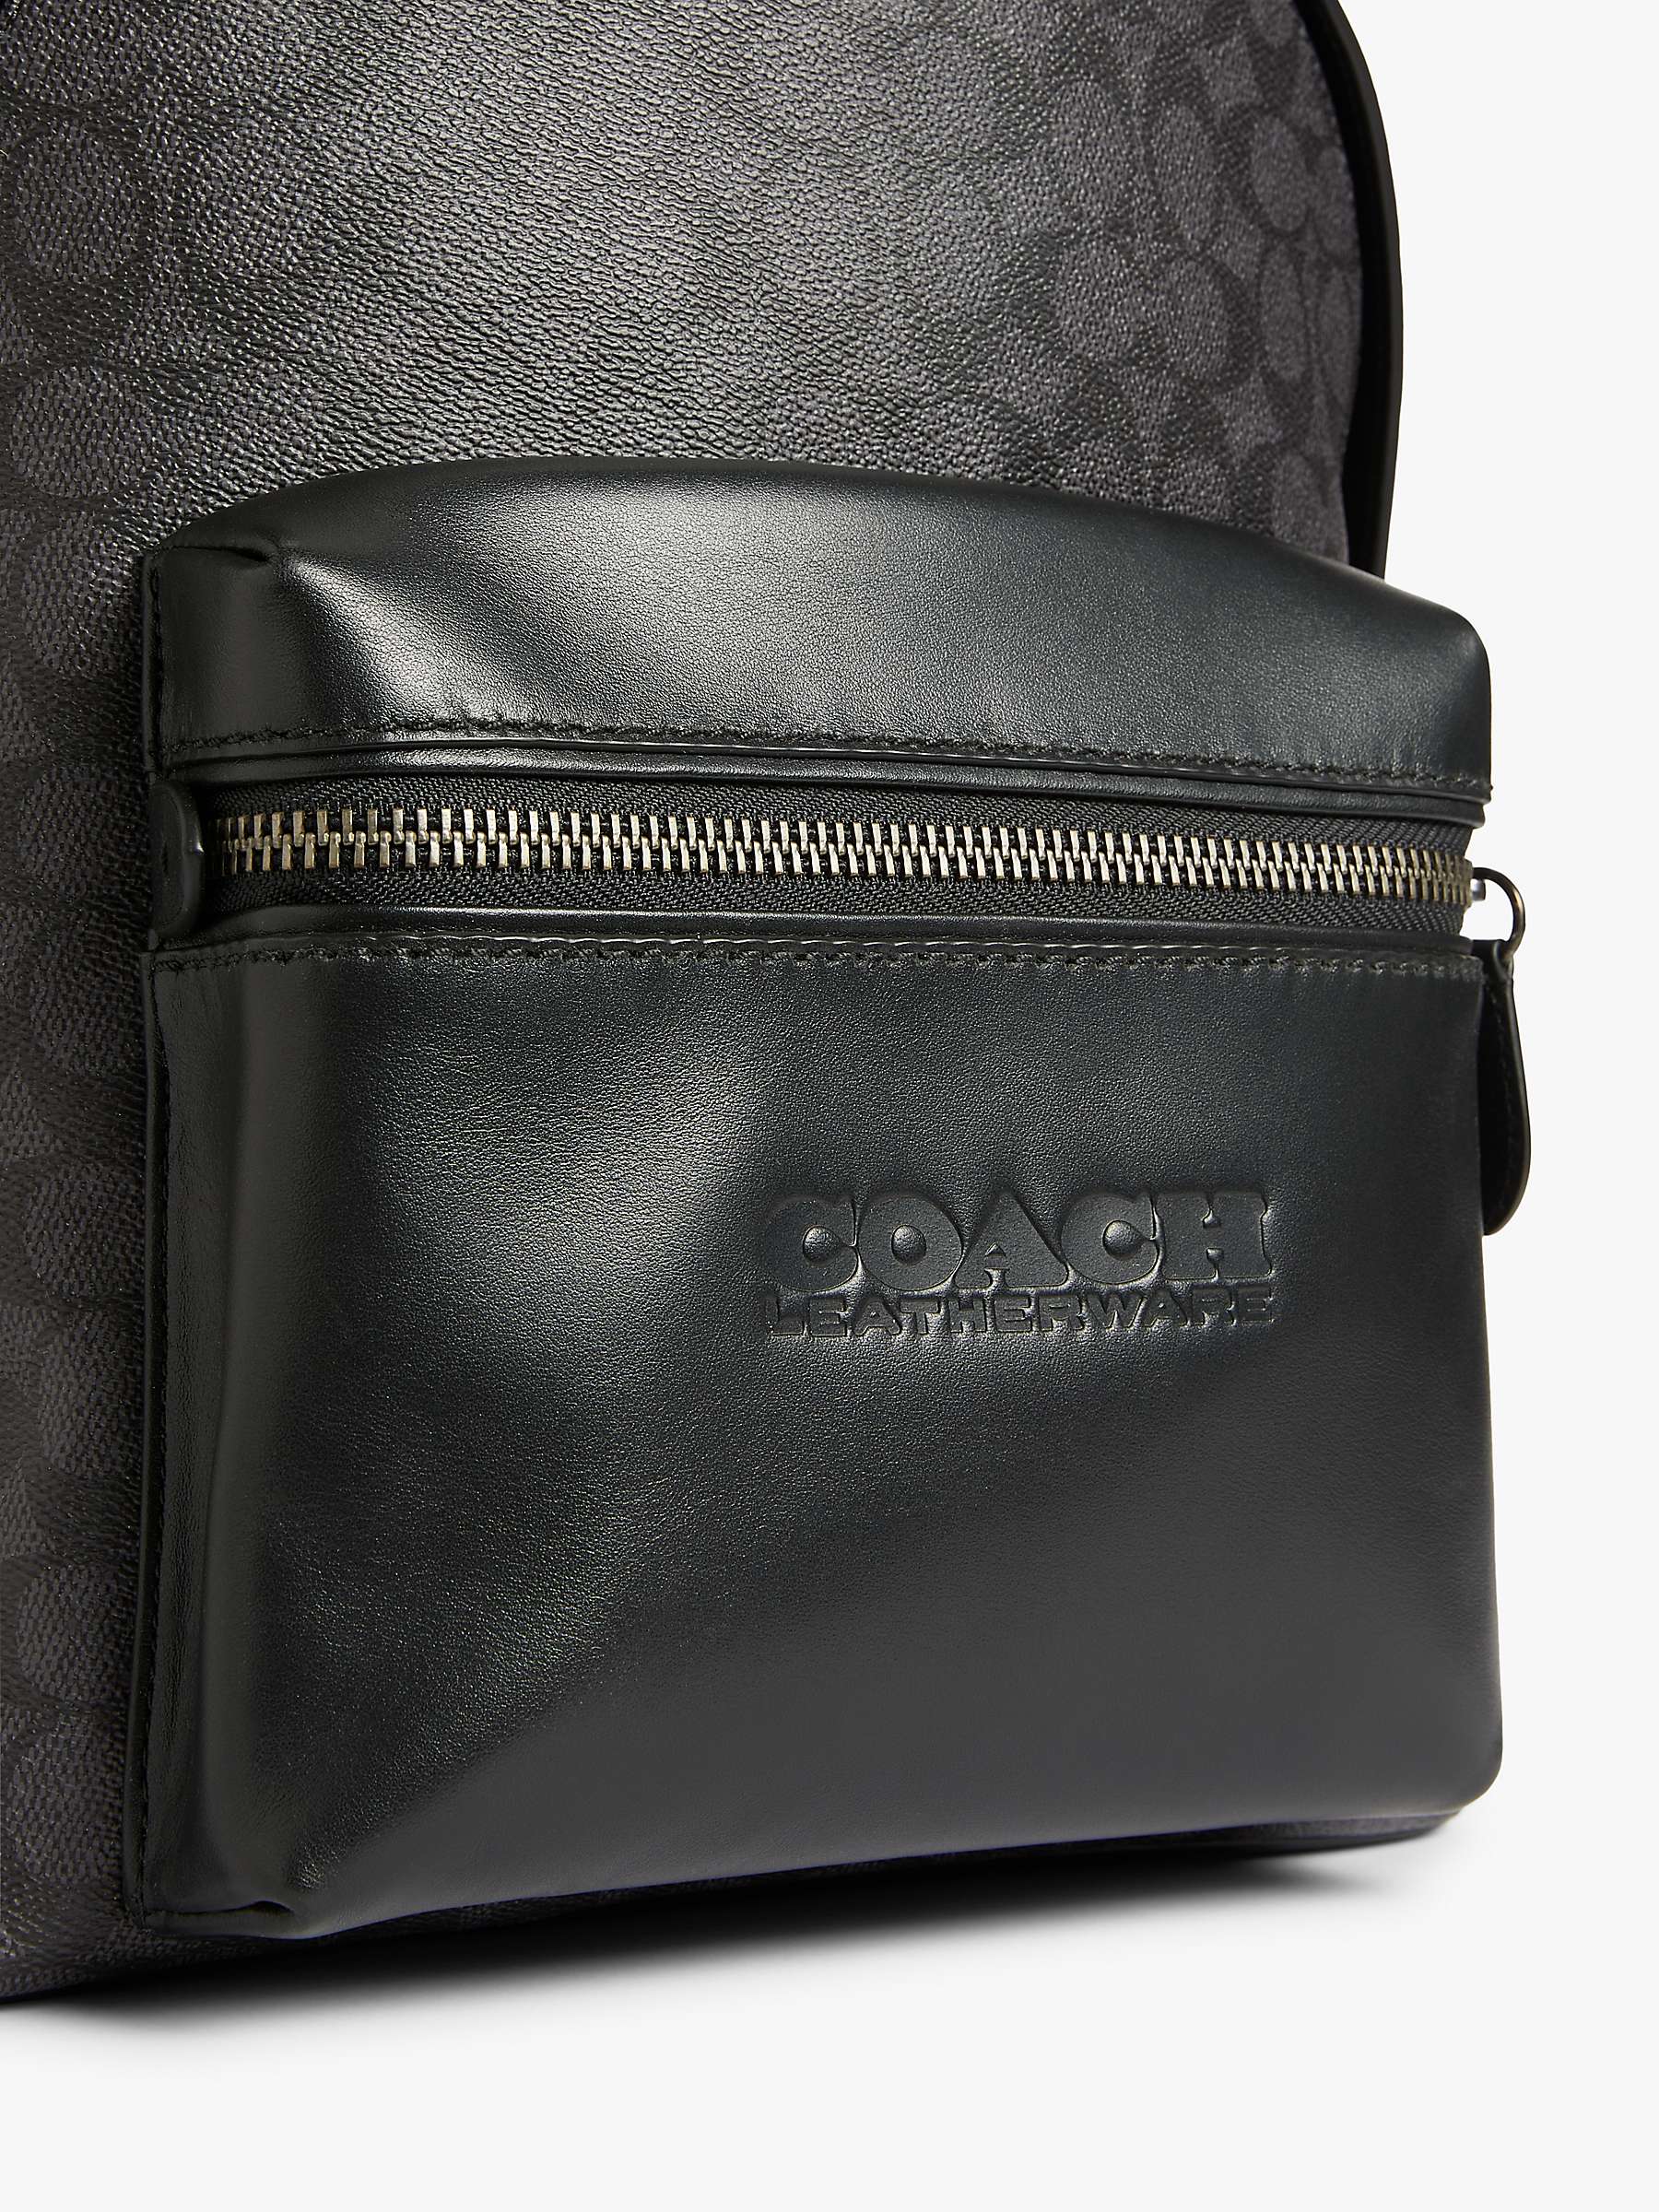 Buy Coach Charter Signature Leather Backpack, Black Online at johnlewis.com